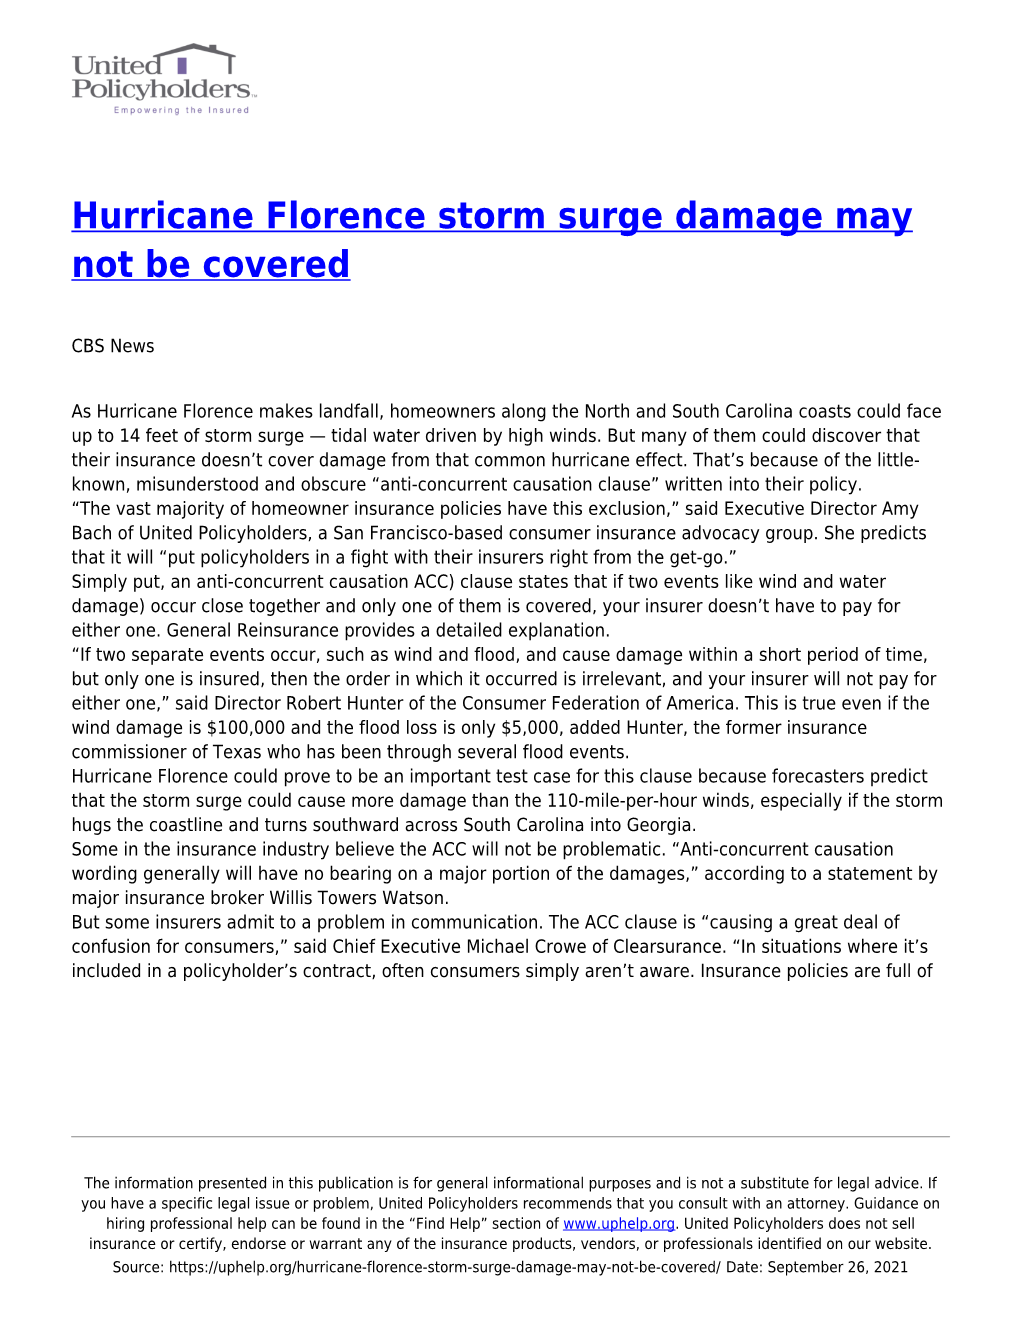 Hurricane Florence Storm Surge Damage May Not Be Covered